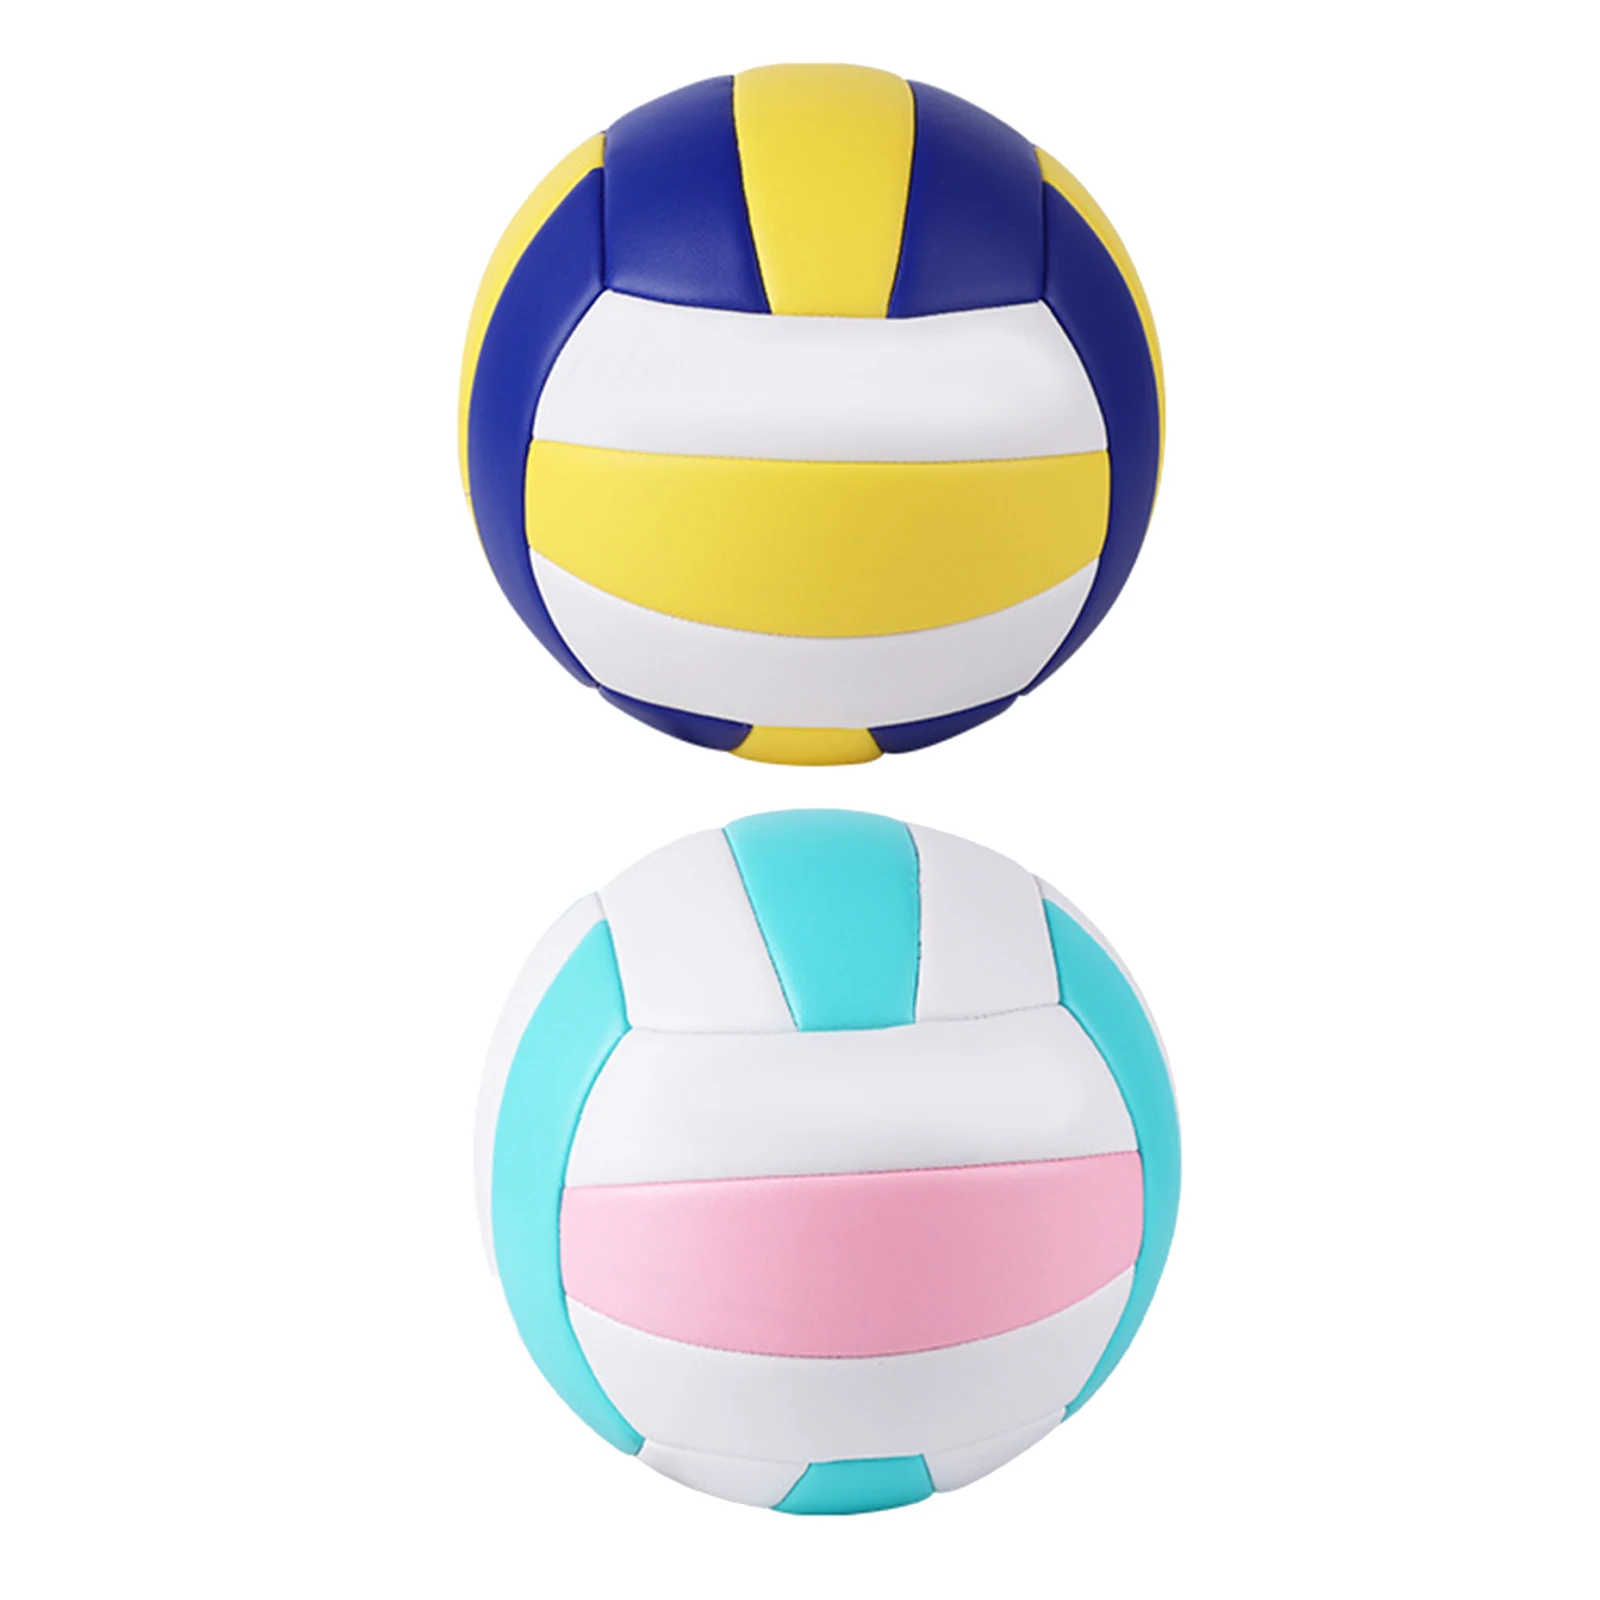 COLOR TREE Volleyball Official Size 5 Beach Soft Volleyball for Beginners Outdoor Indoor Game Training Match. 